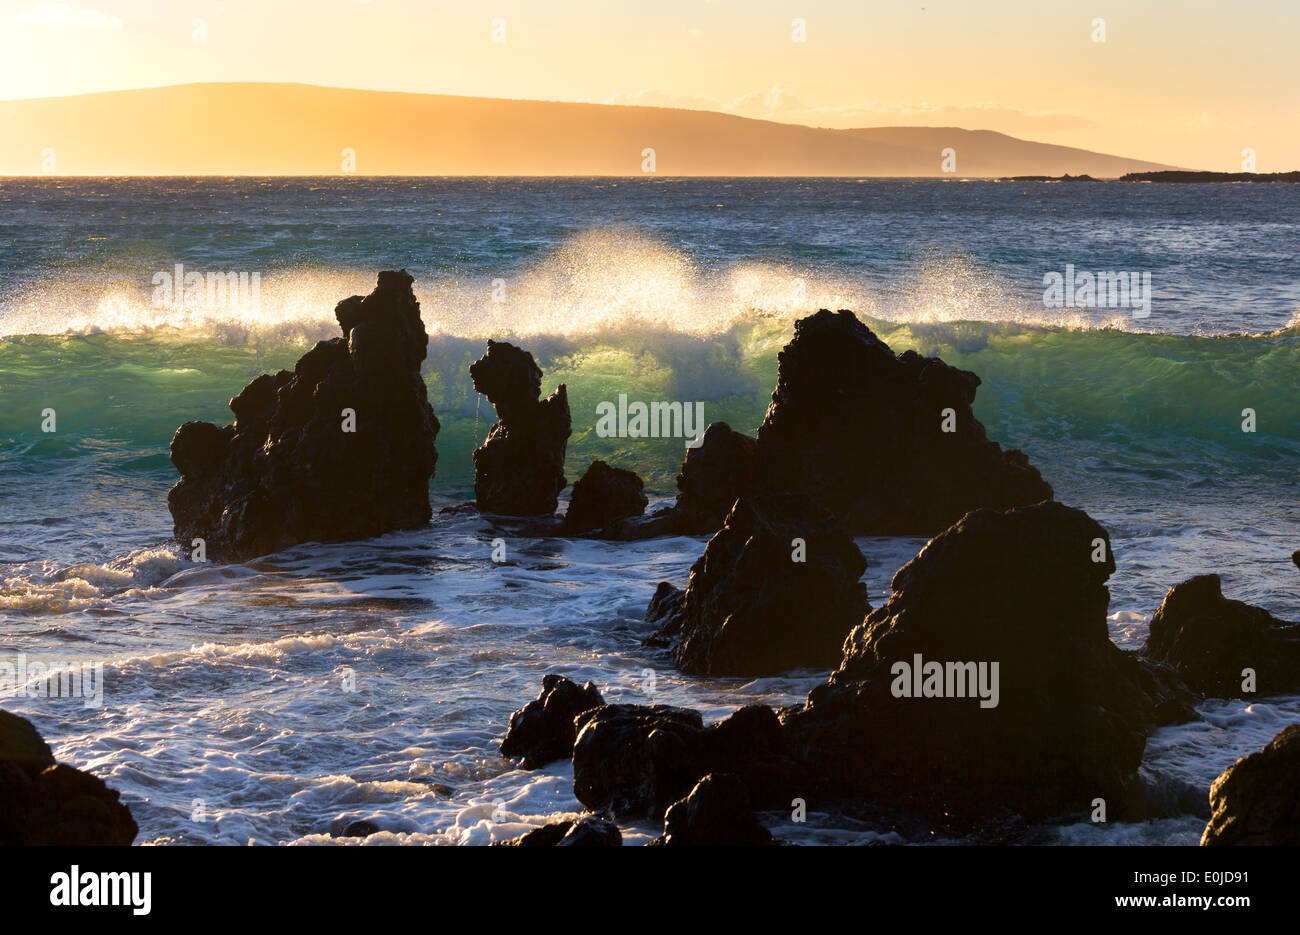 Surf breaks on lava rocks at La Perouse Bay with Kaho' Olawe Island in background from Maui, Hawaii Stock Photo